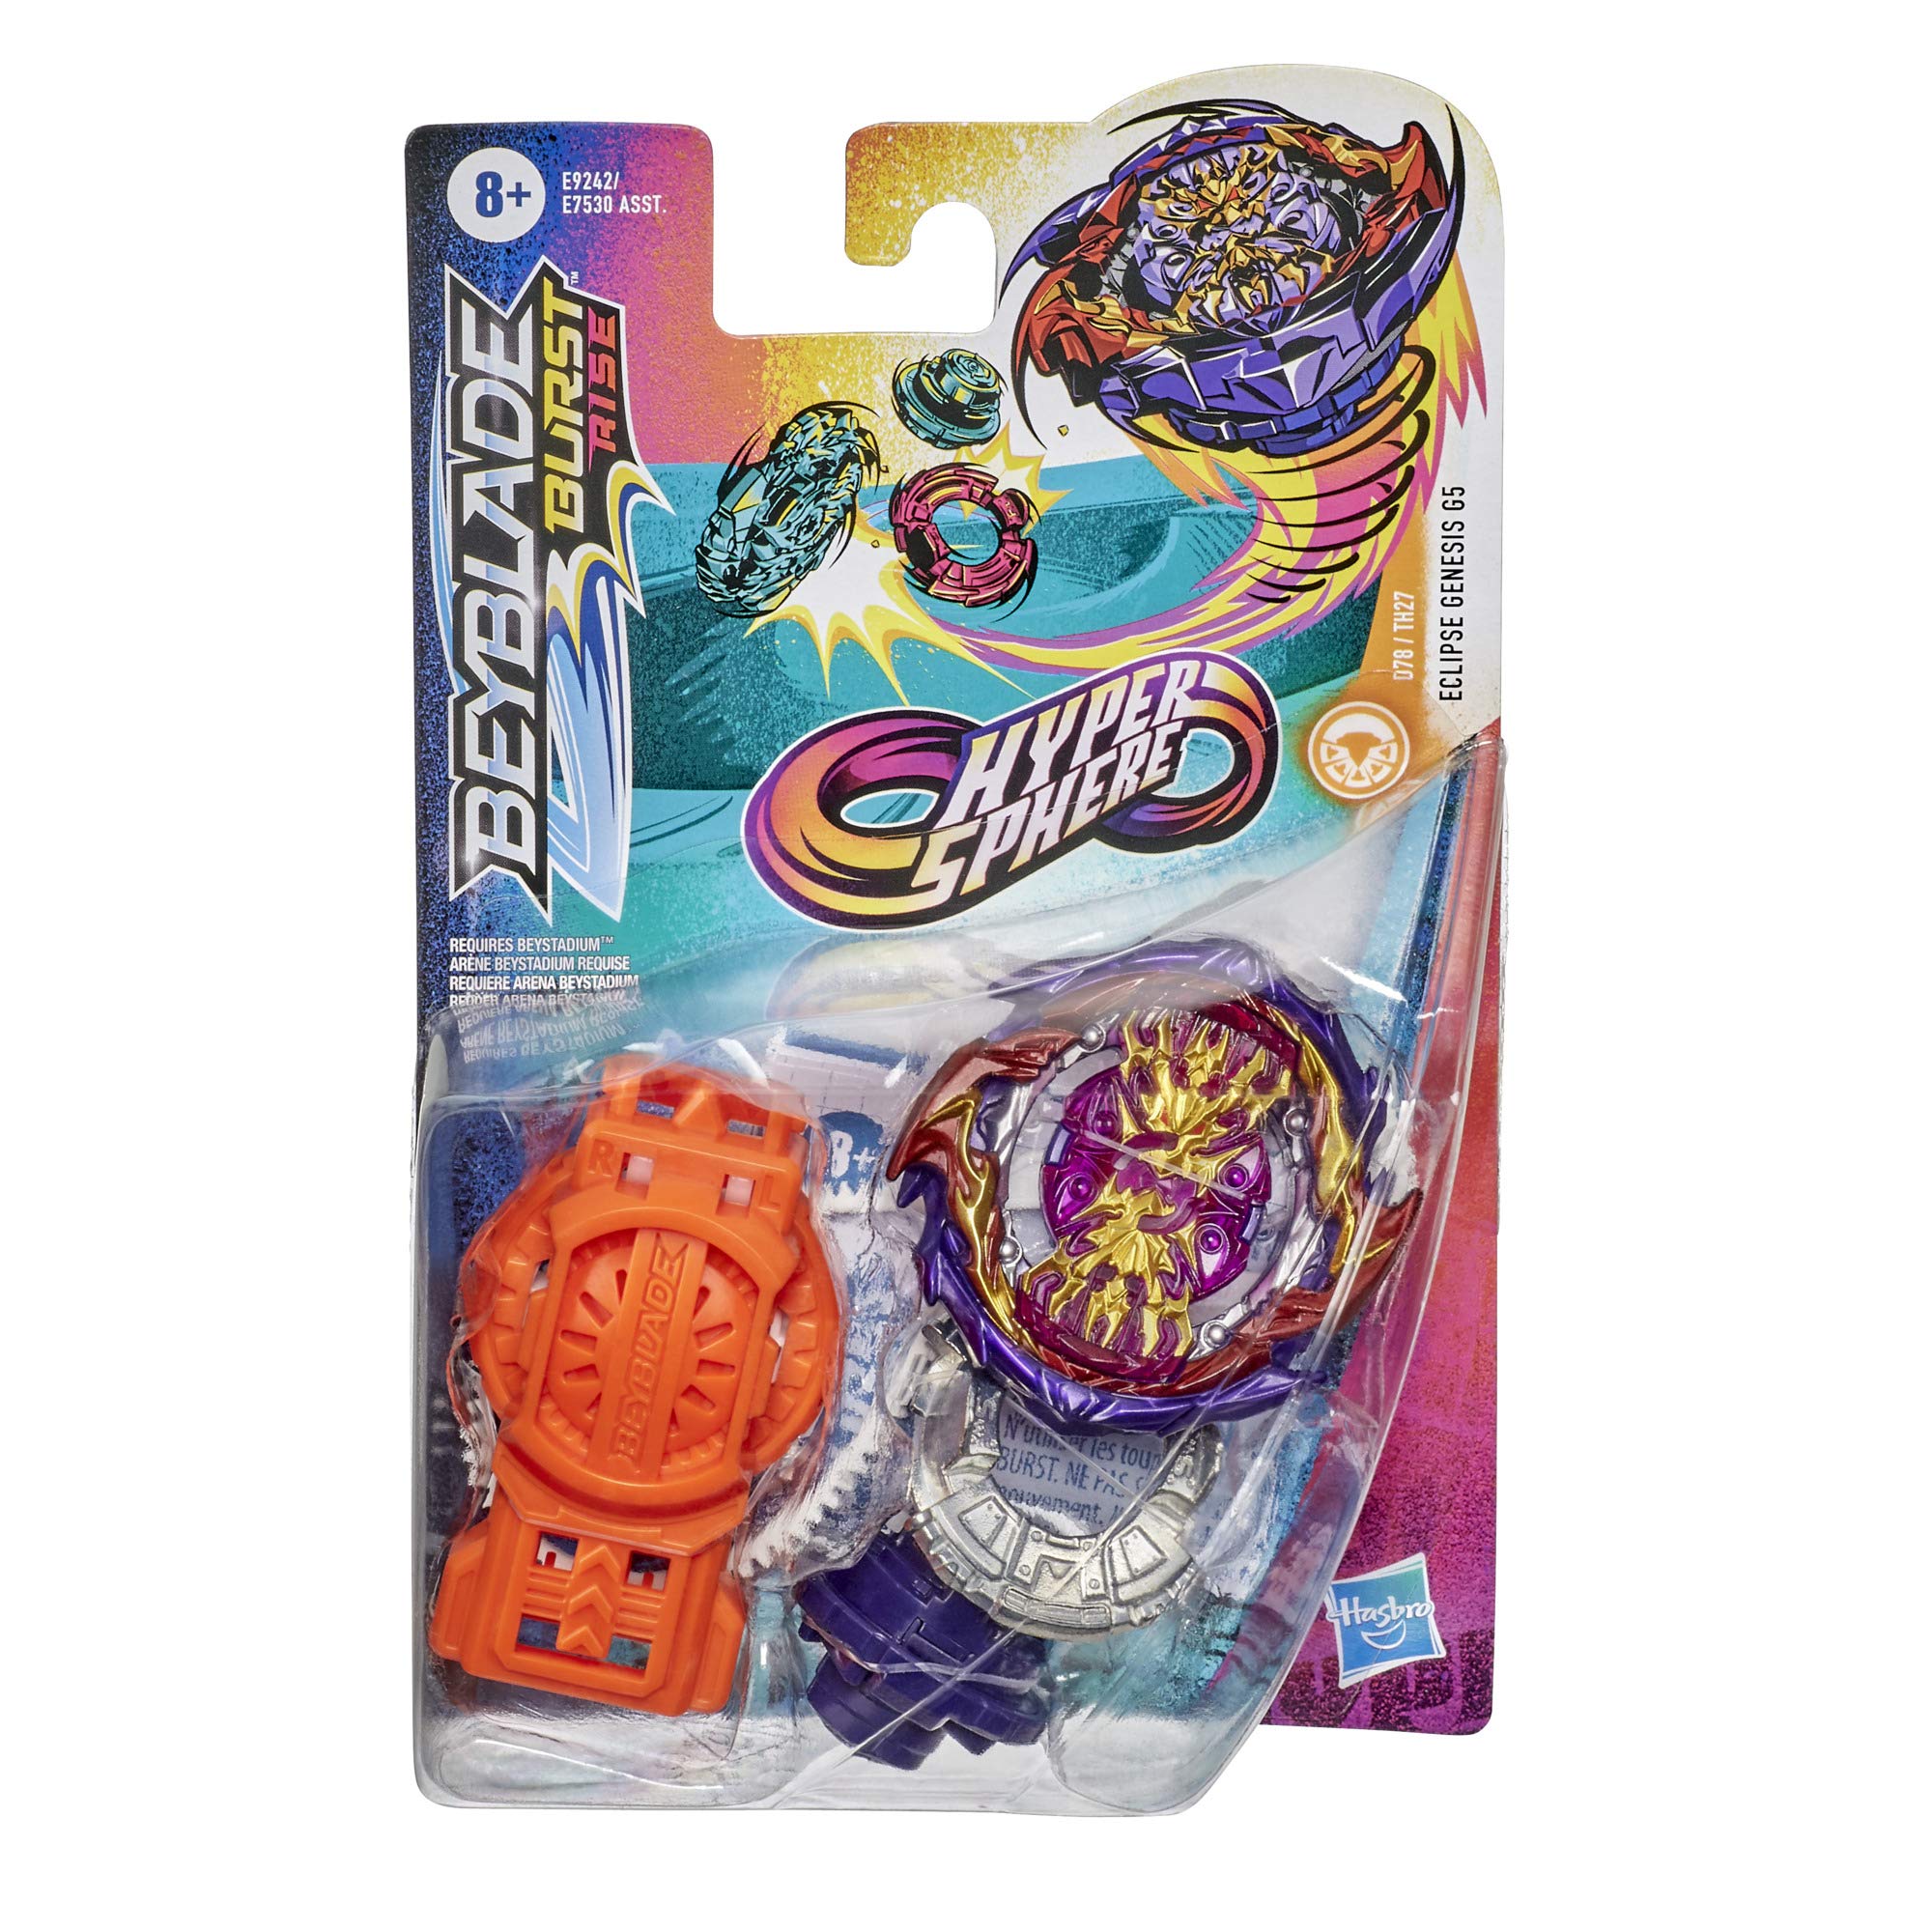 BEYBLADE Burst Rise Hypersphere Eclipse Genesis G5 Starter Pack -- Stamina Type Battling Game Top and Launcher, Toys Ages 8 and Up